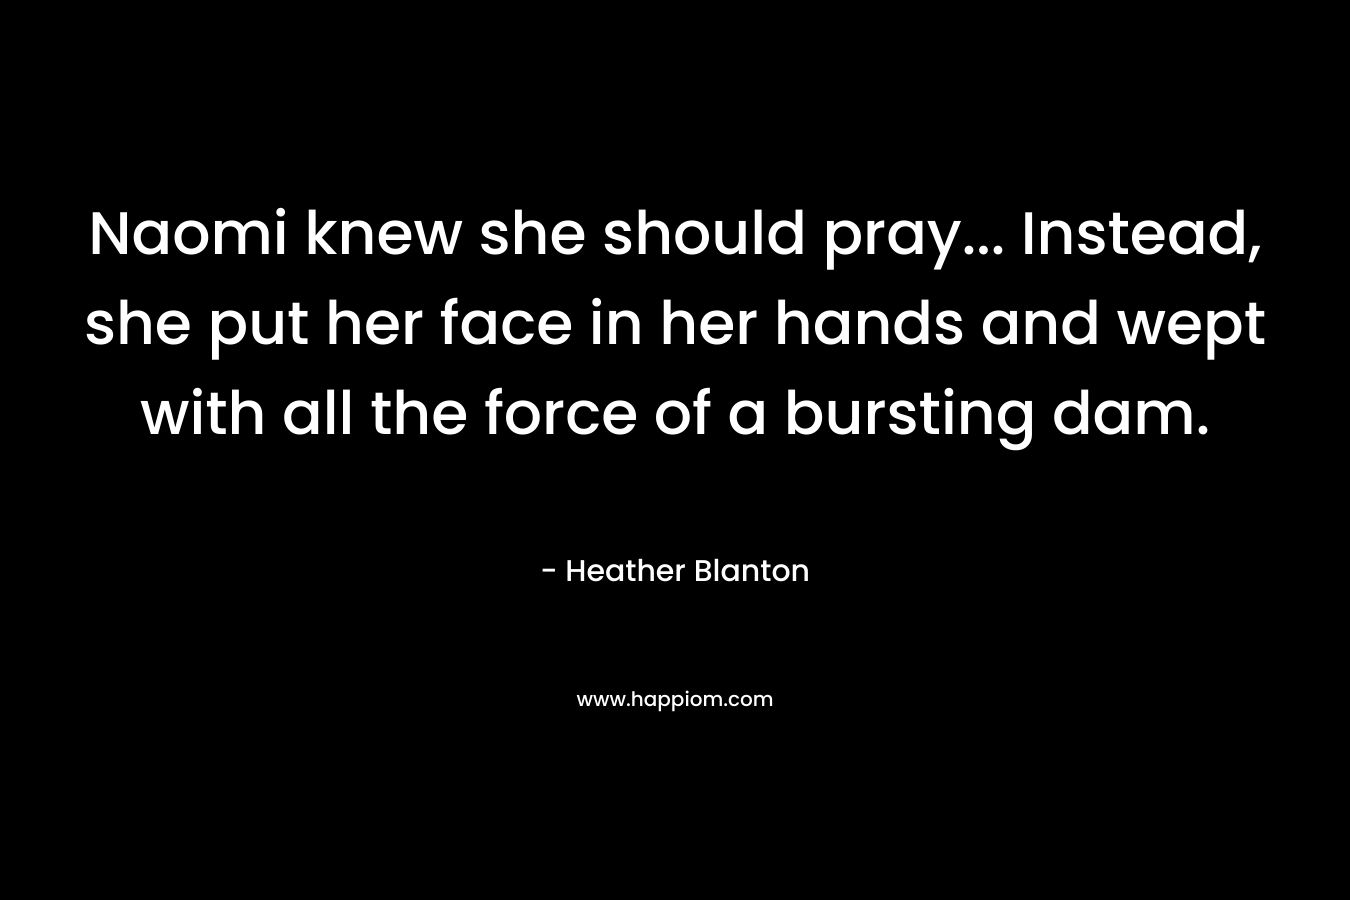 Naomi knew she should pray… Instead, she put her face in her hands and wept with all the force of a bursting dam. – Heather Blanton